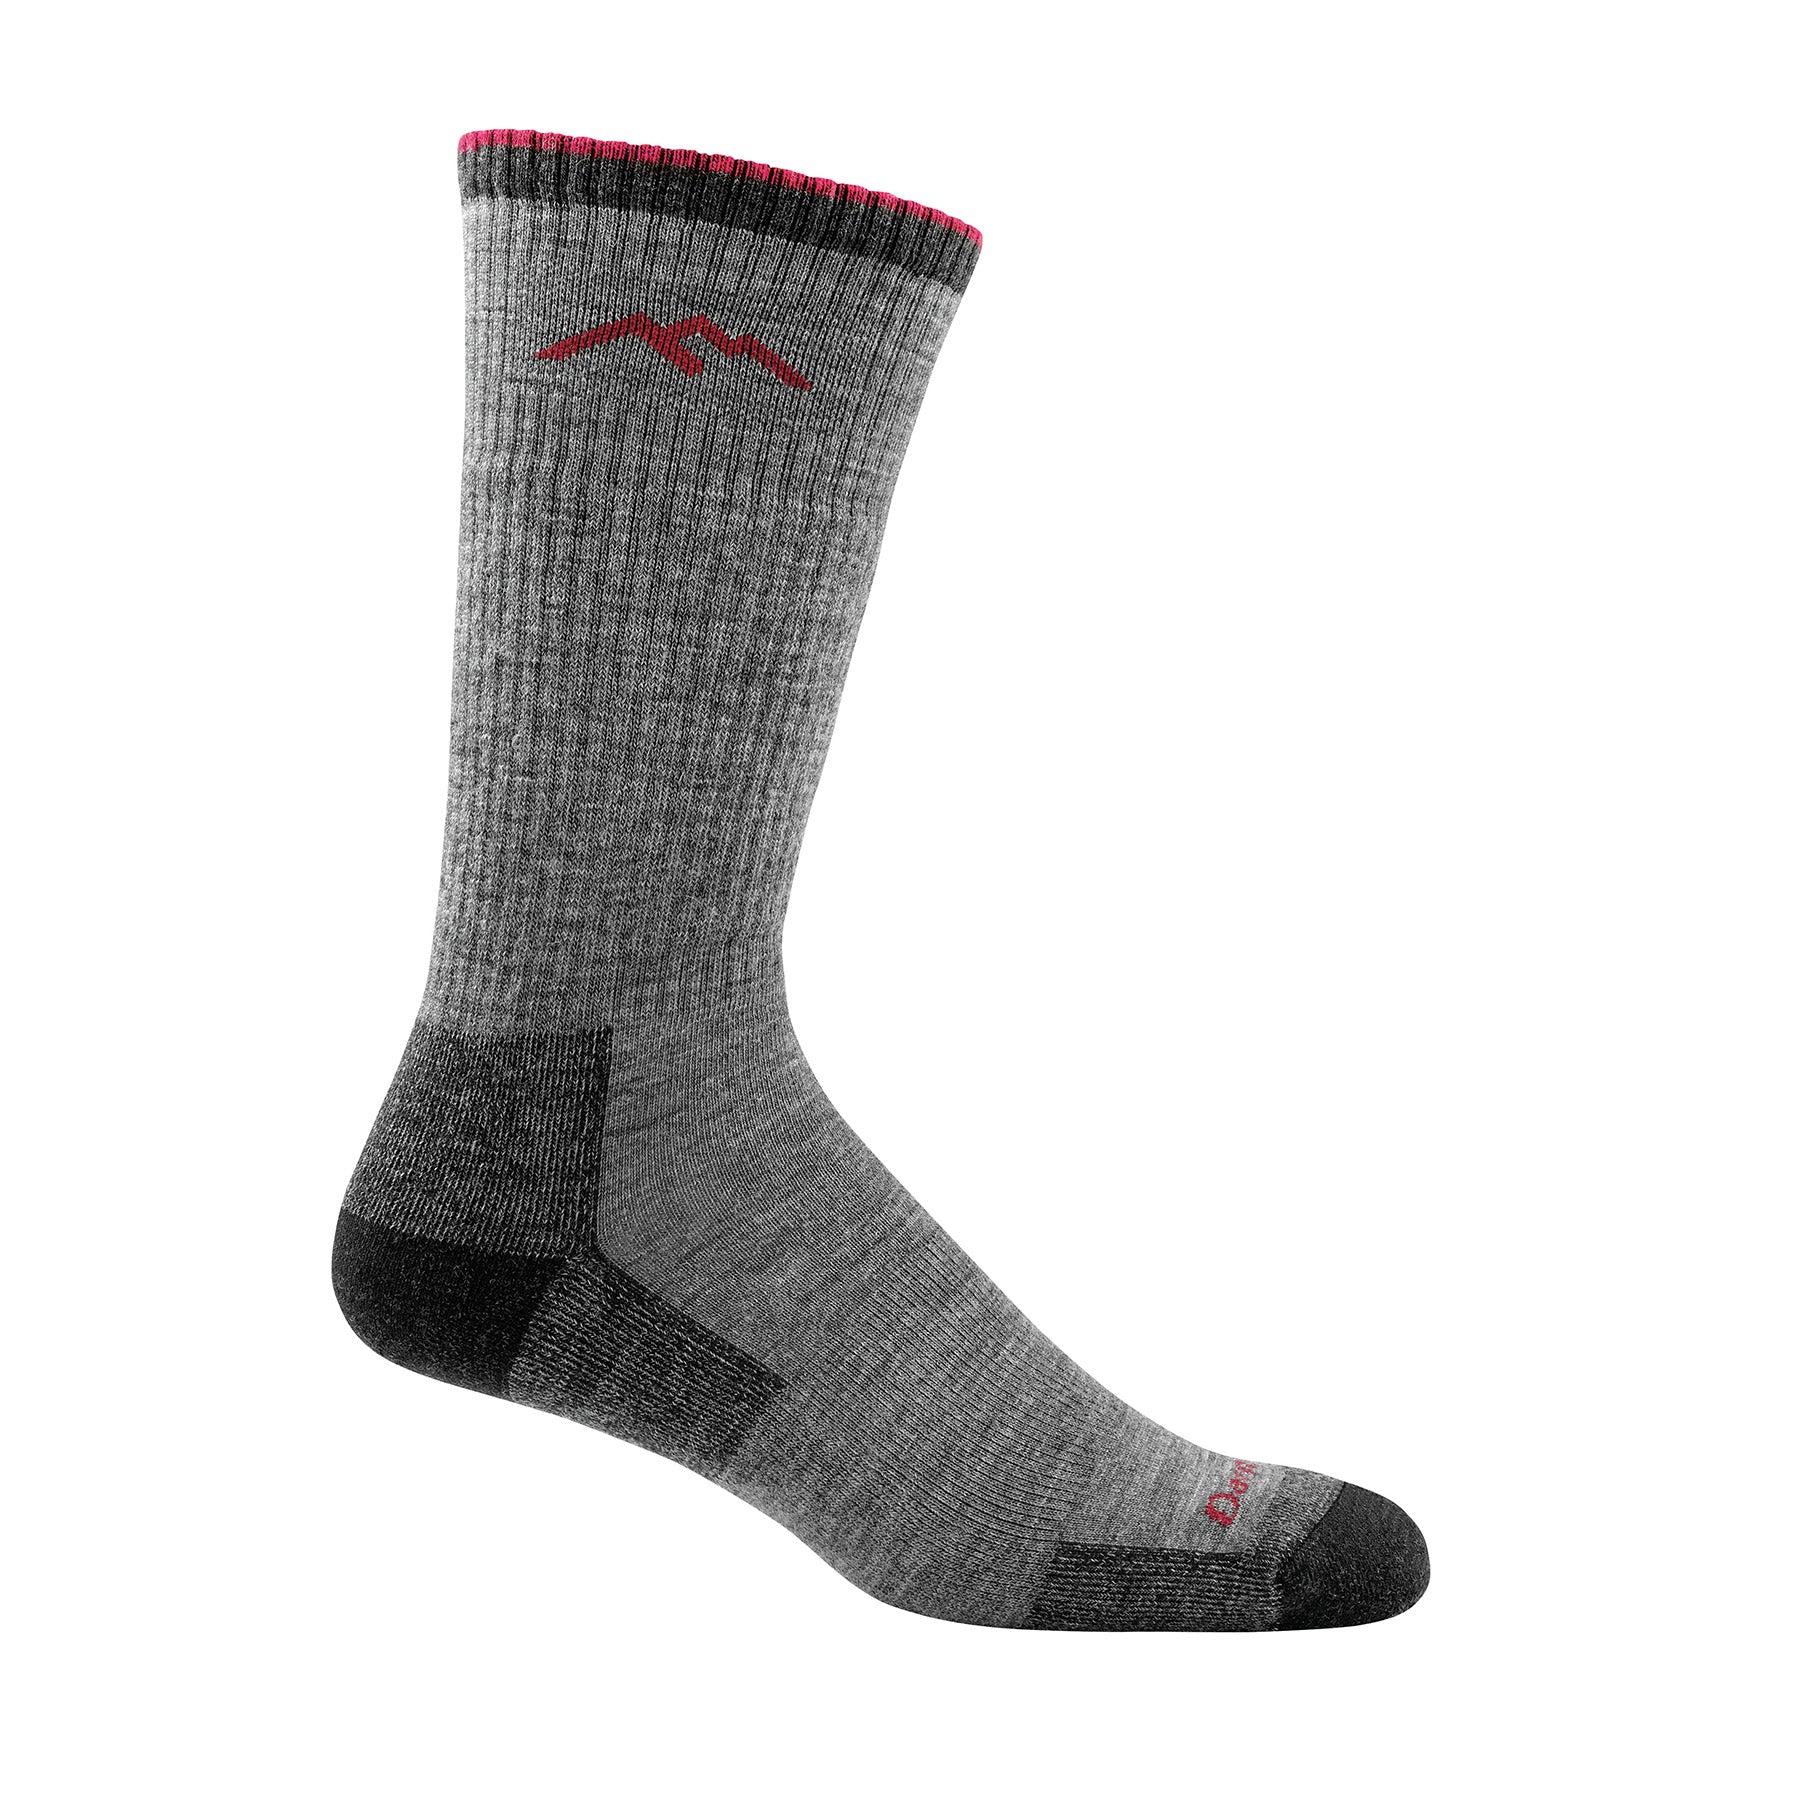 hiker boot sock cushion mens sideview in color grey with black and red detail